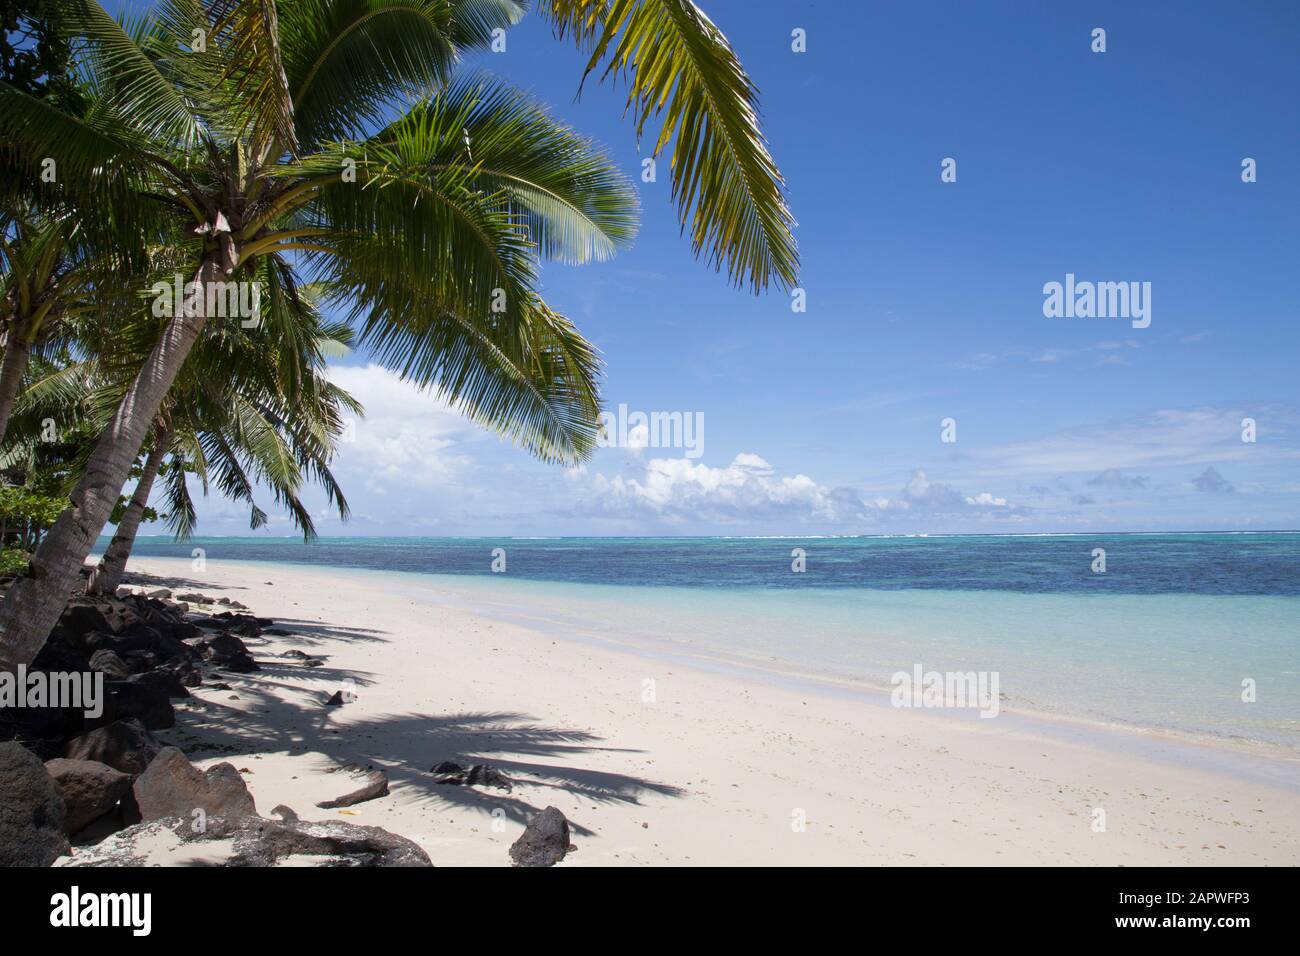 Idyllic tropical sandy beach of the South Pacific islands Stock Photo